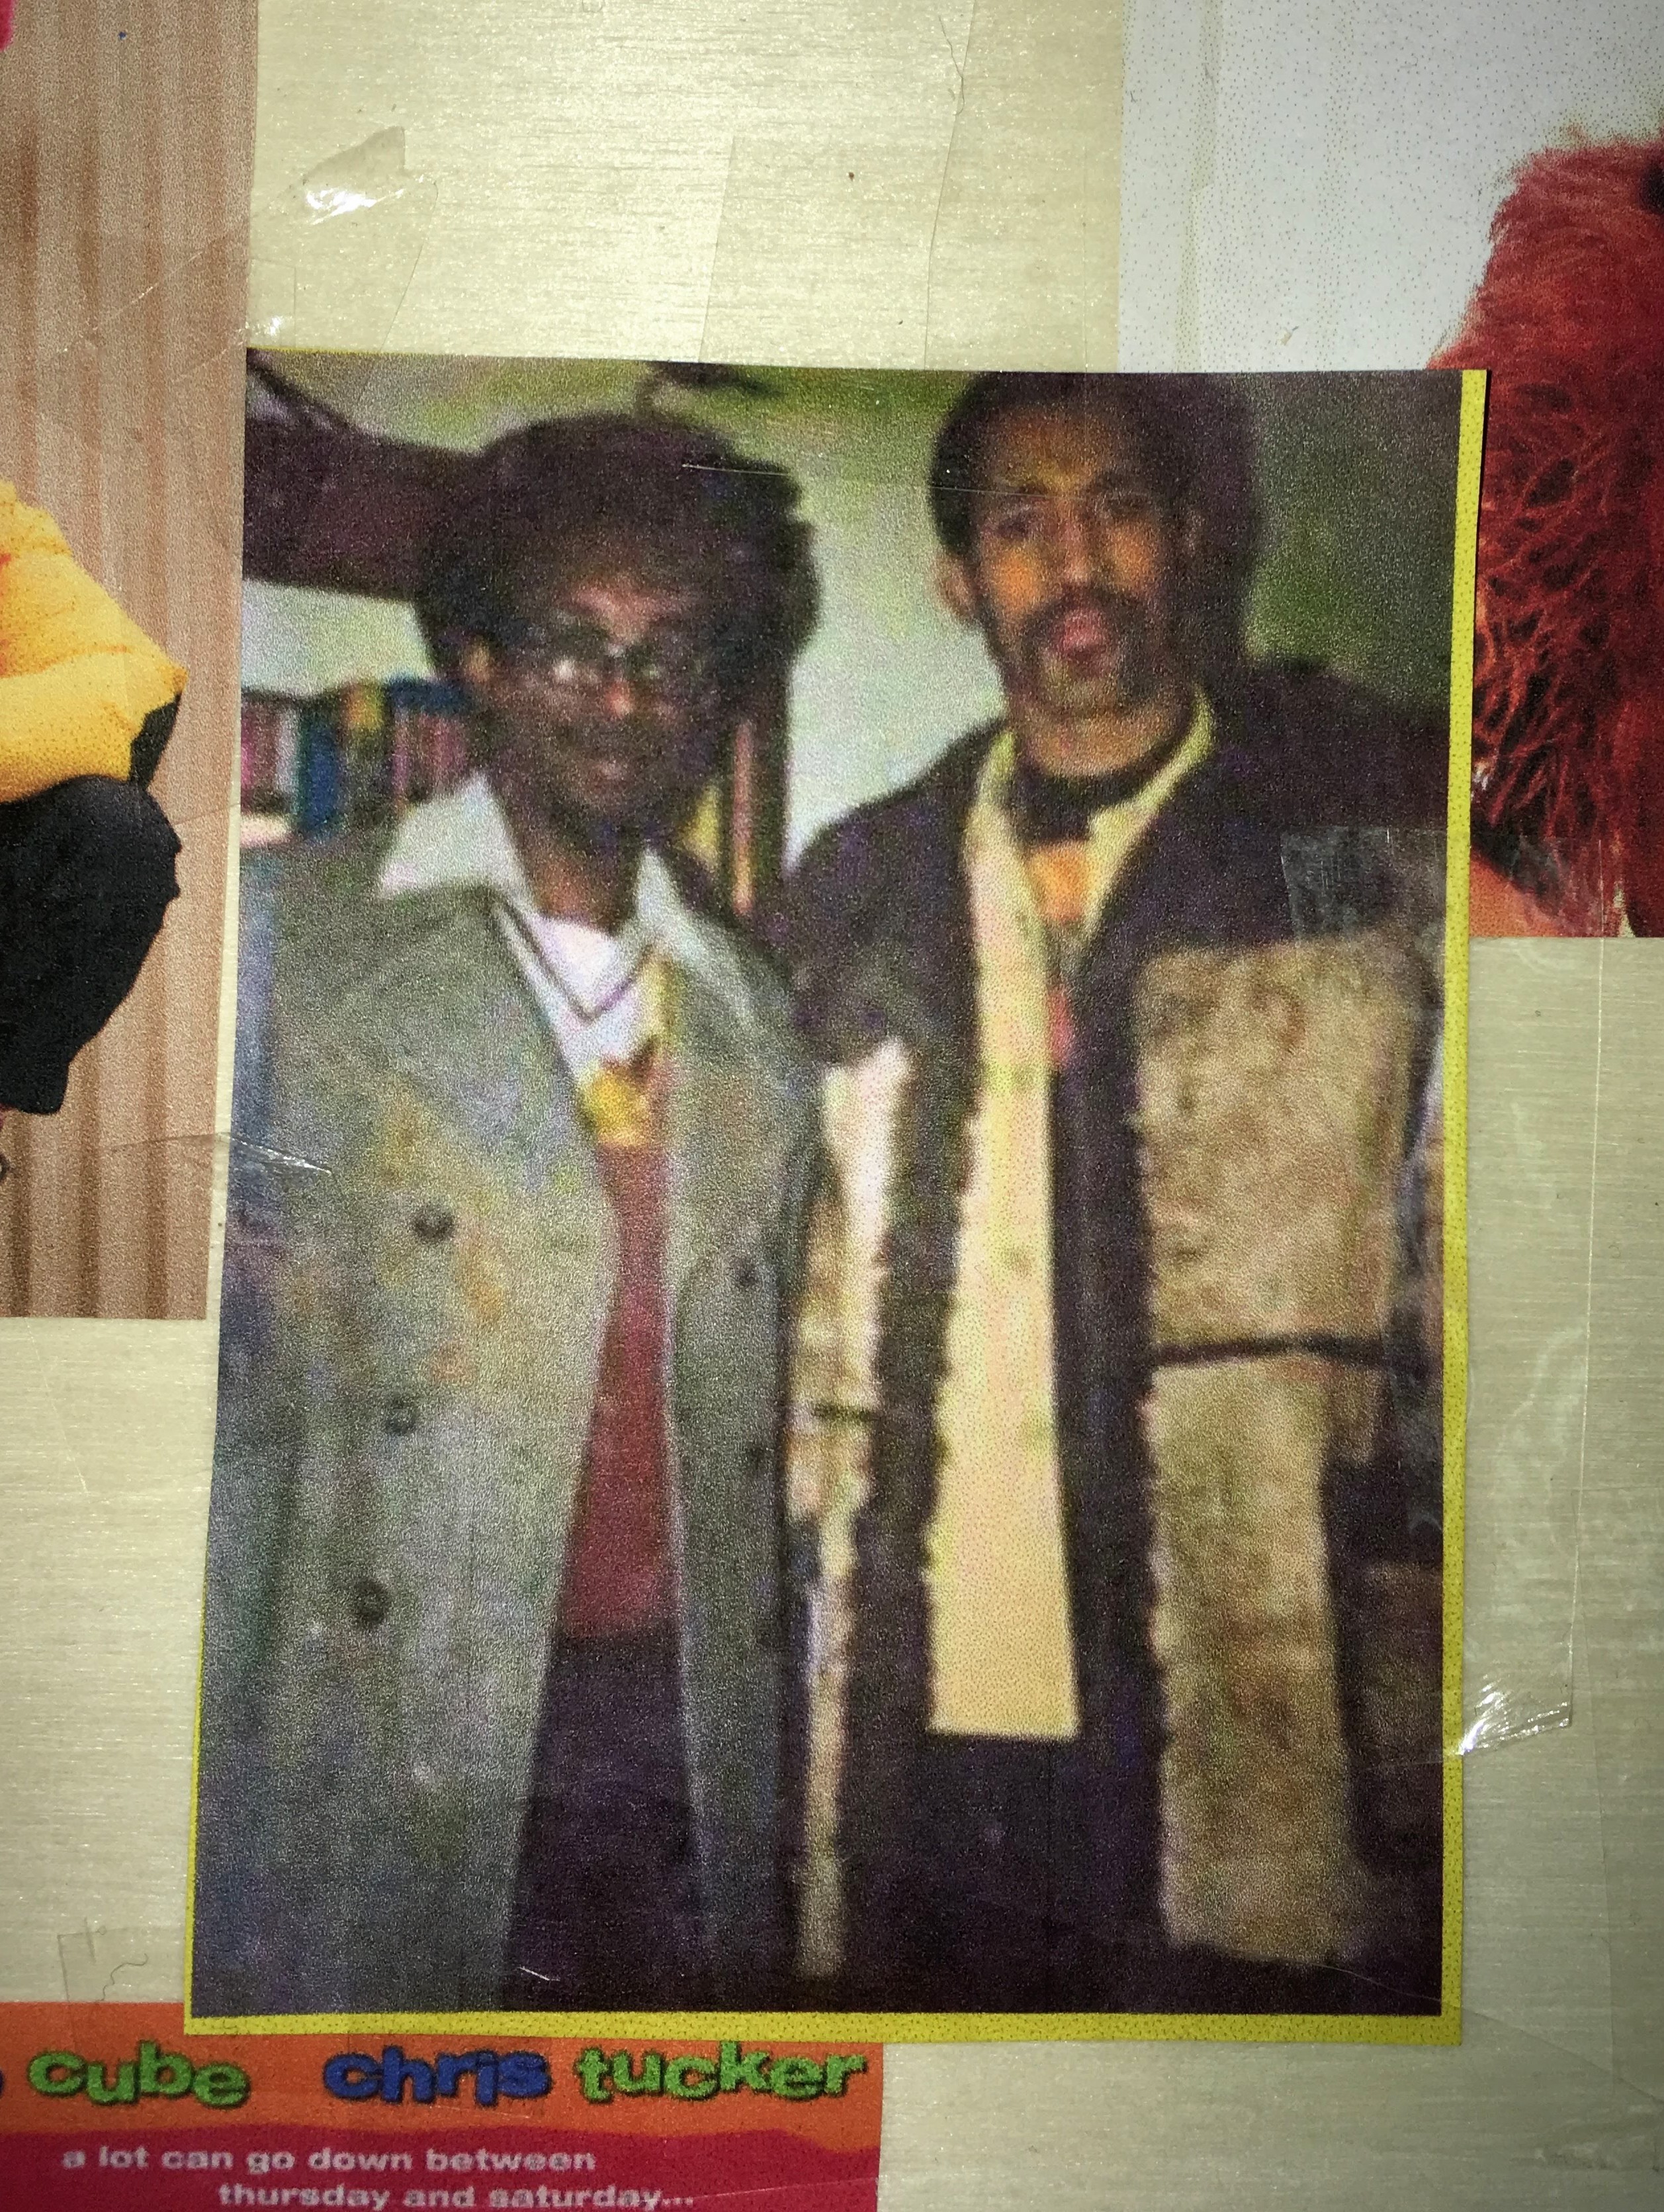 This image is of Coke la Rock (left) and DJ Kool Herc (right) . I place this image in the center of the box because they are noted to be the first emcee and DJ of hip-hop. I feel they have to be in the middle because without them, the rest may not exist.